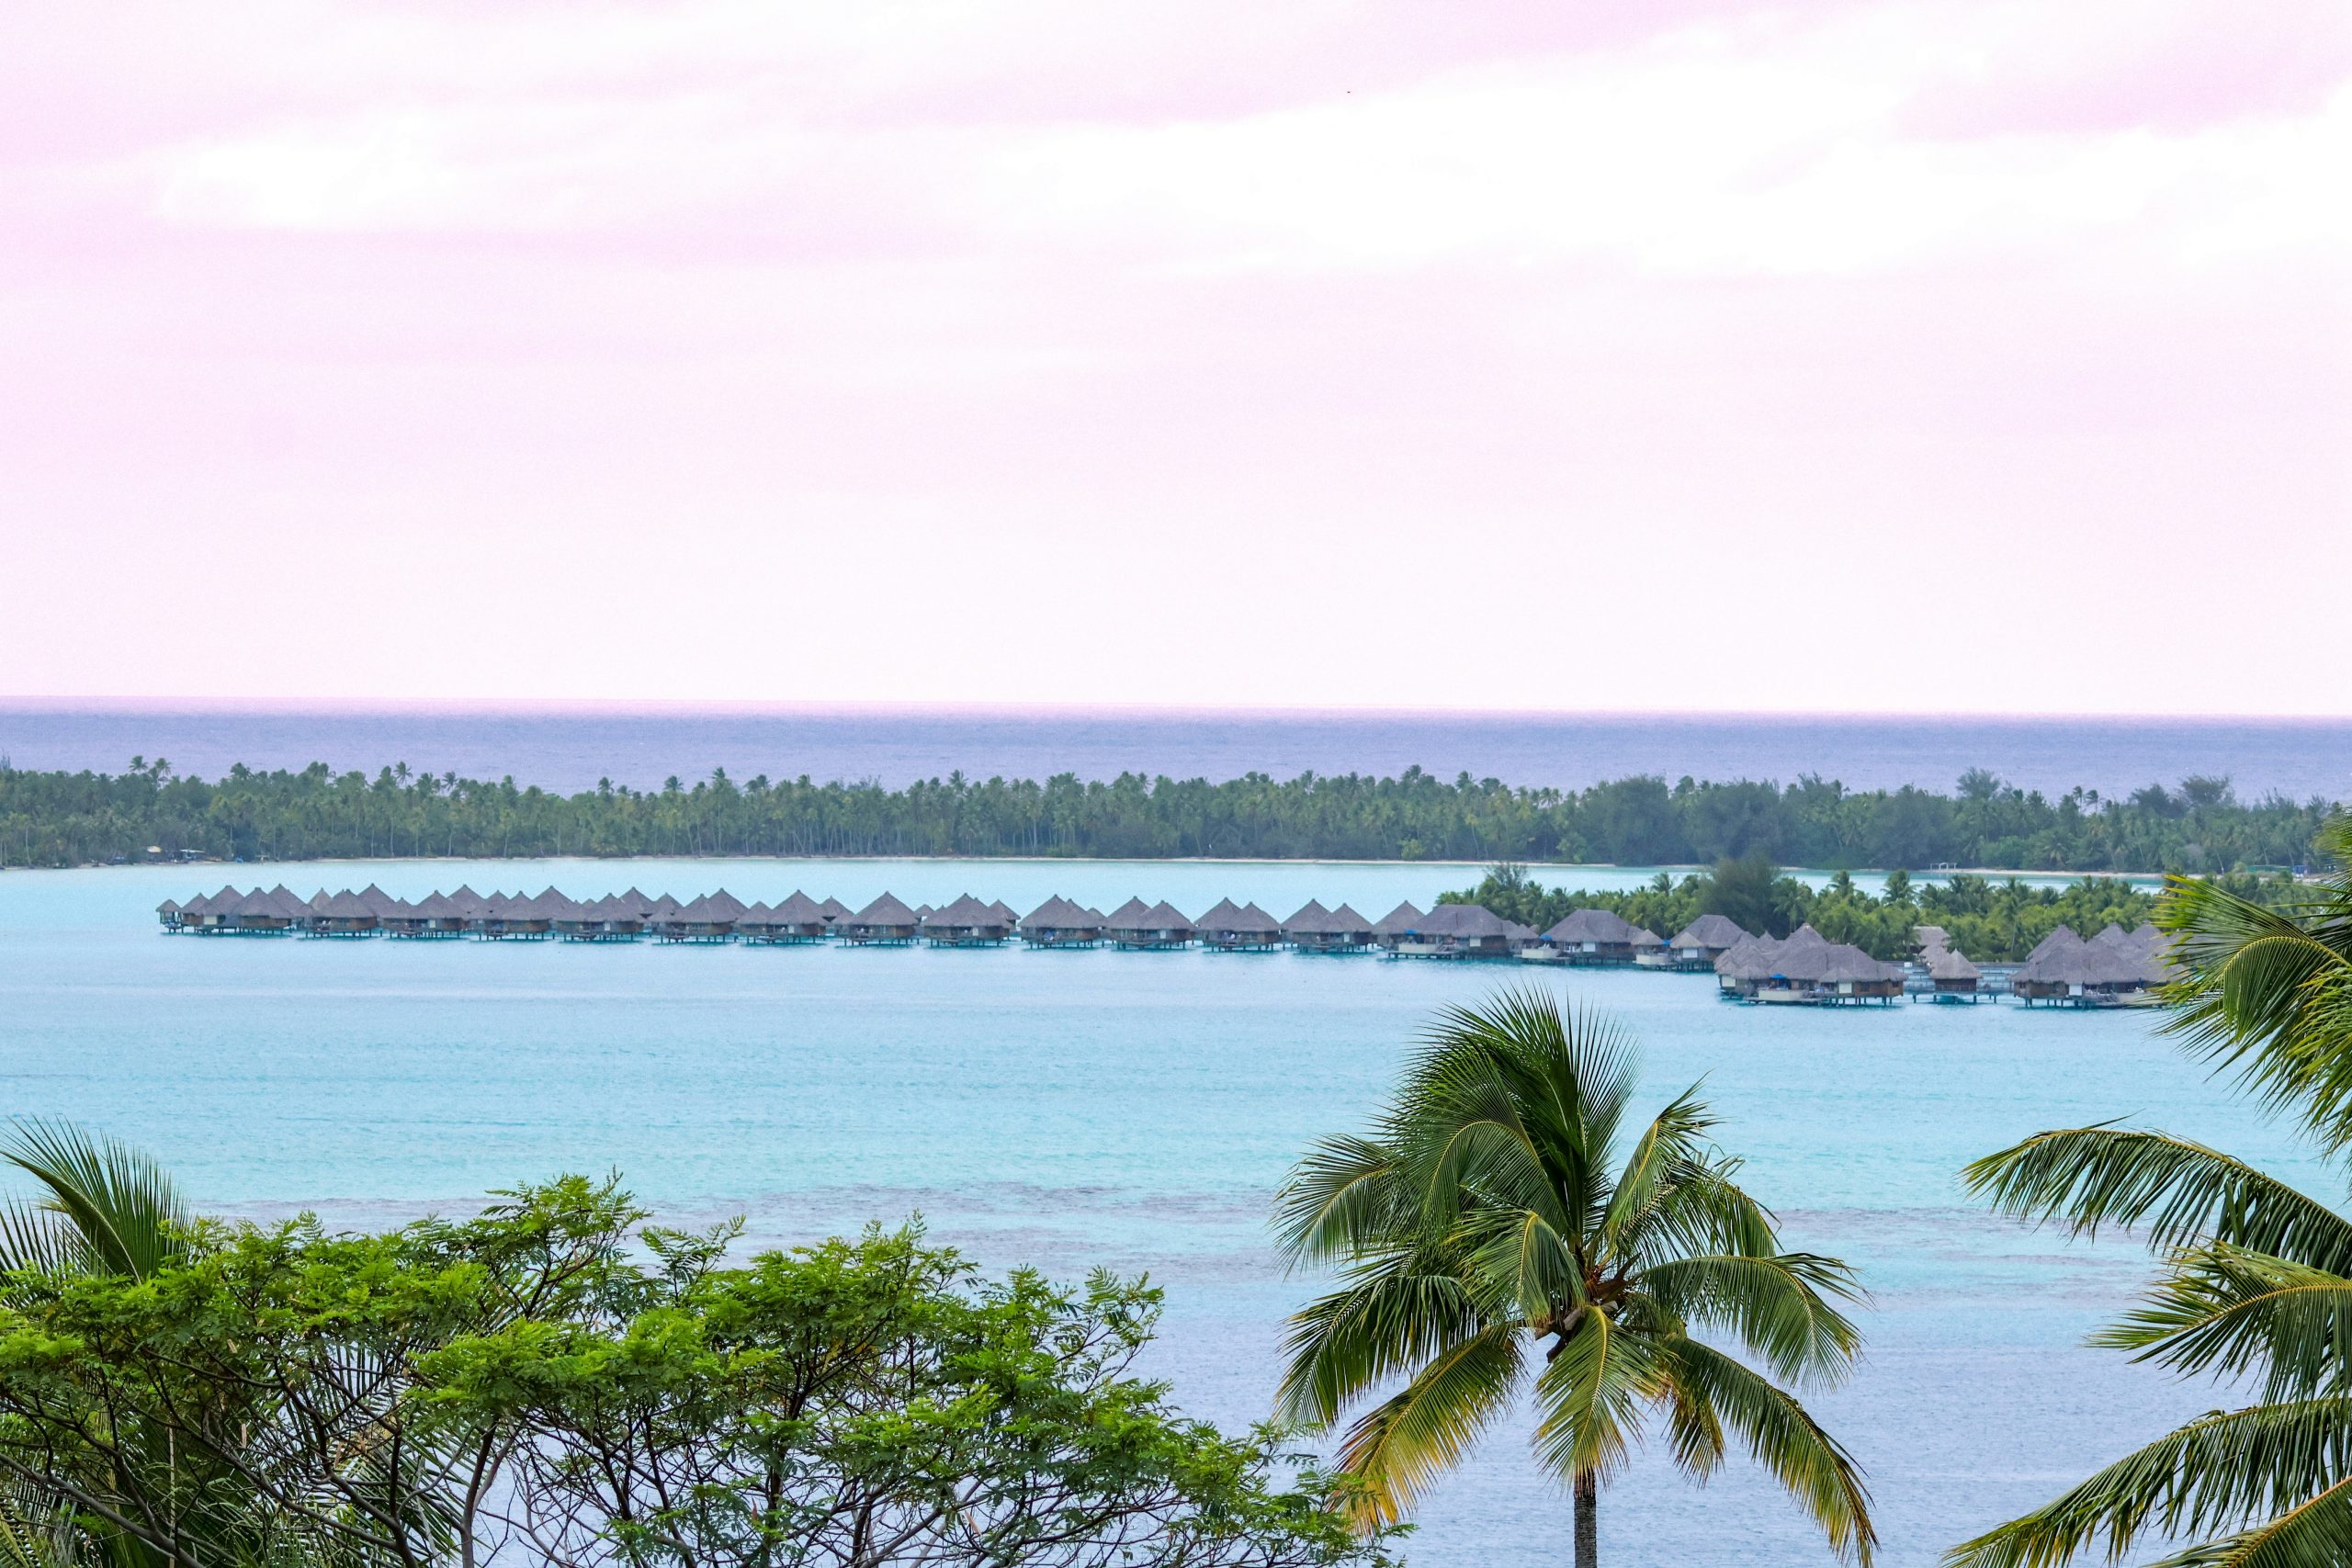 explore the beauty of tahiti with tahiti tourism. plan your perfect vacation, from the stunning beaches to the vibrant culture.